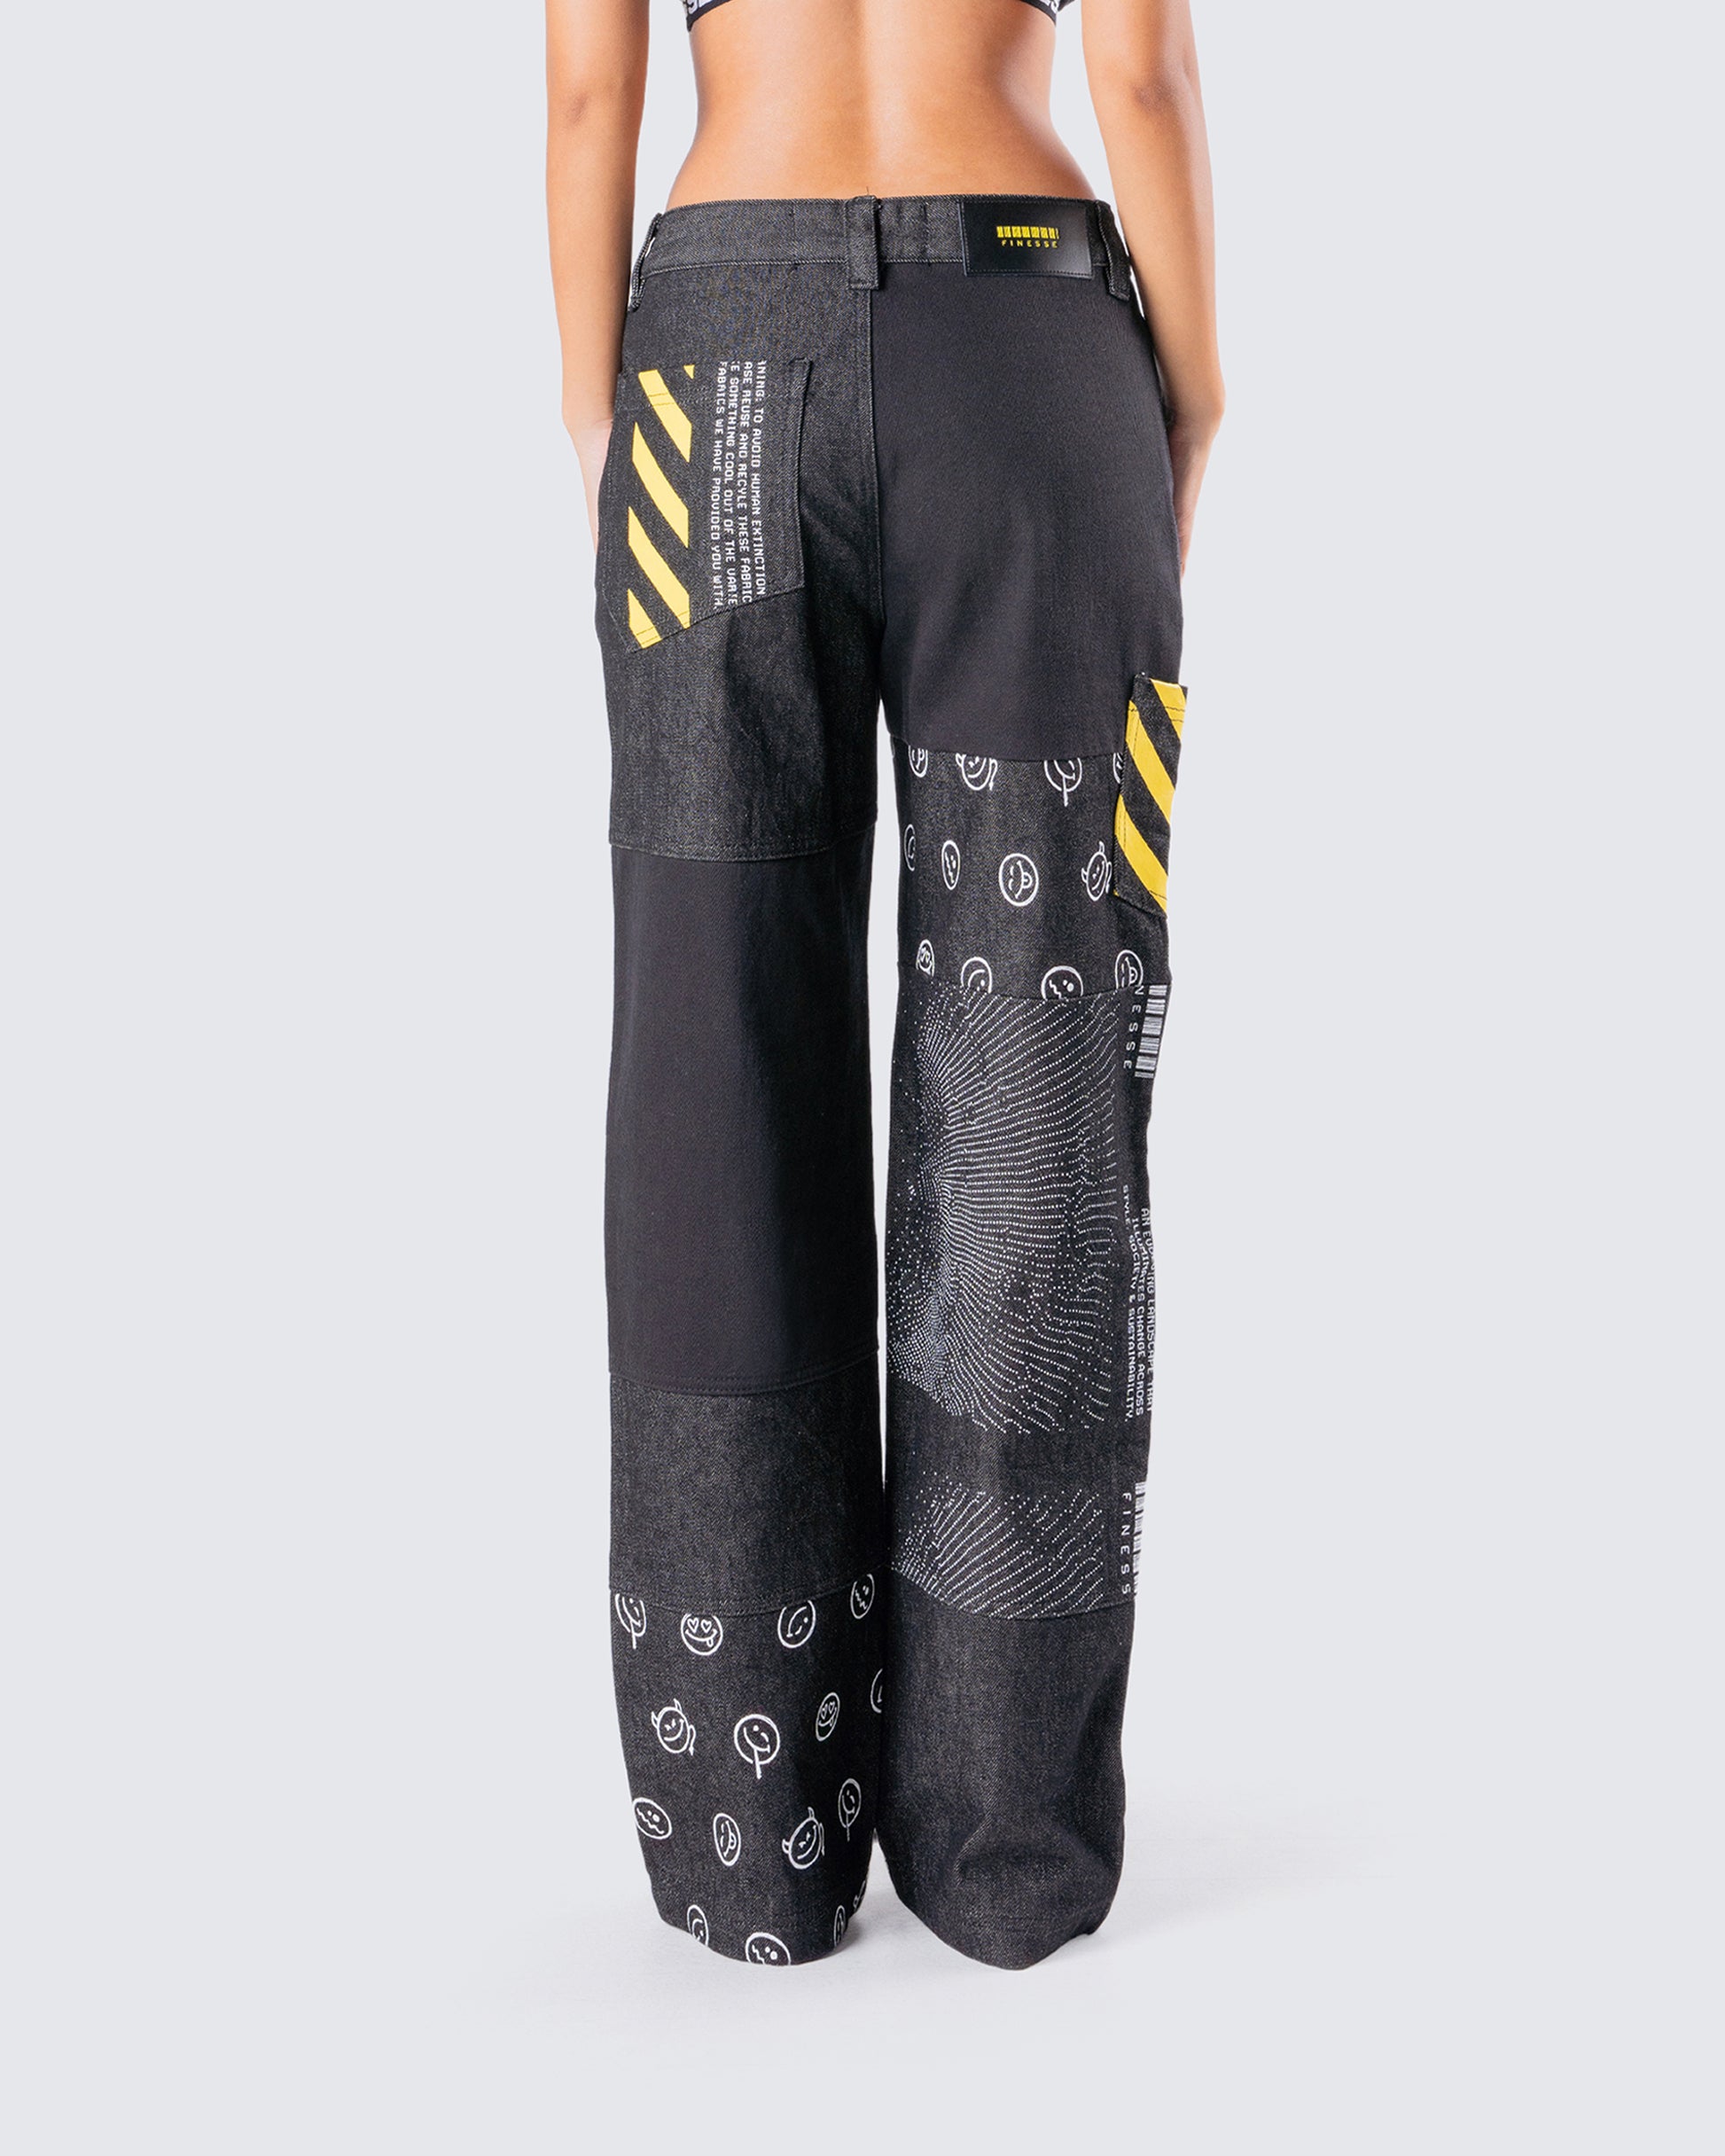 Jacko Printed Patchwork Pants – FINESSE